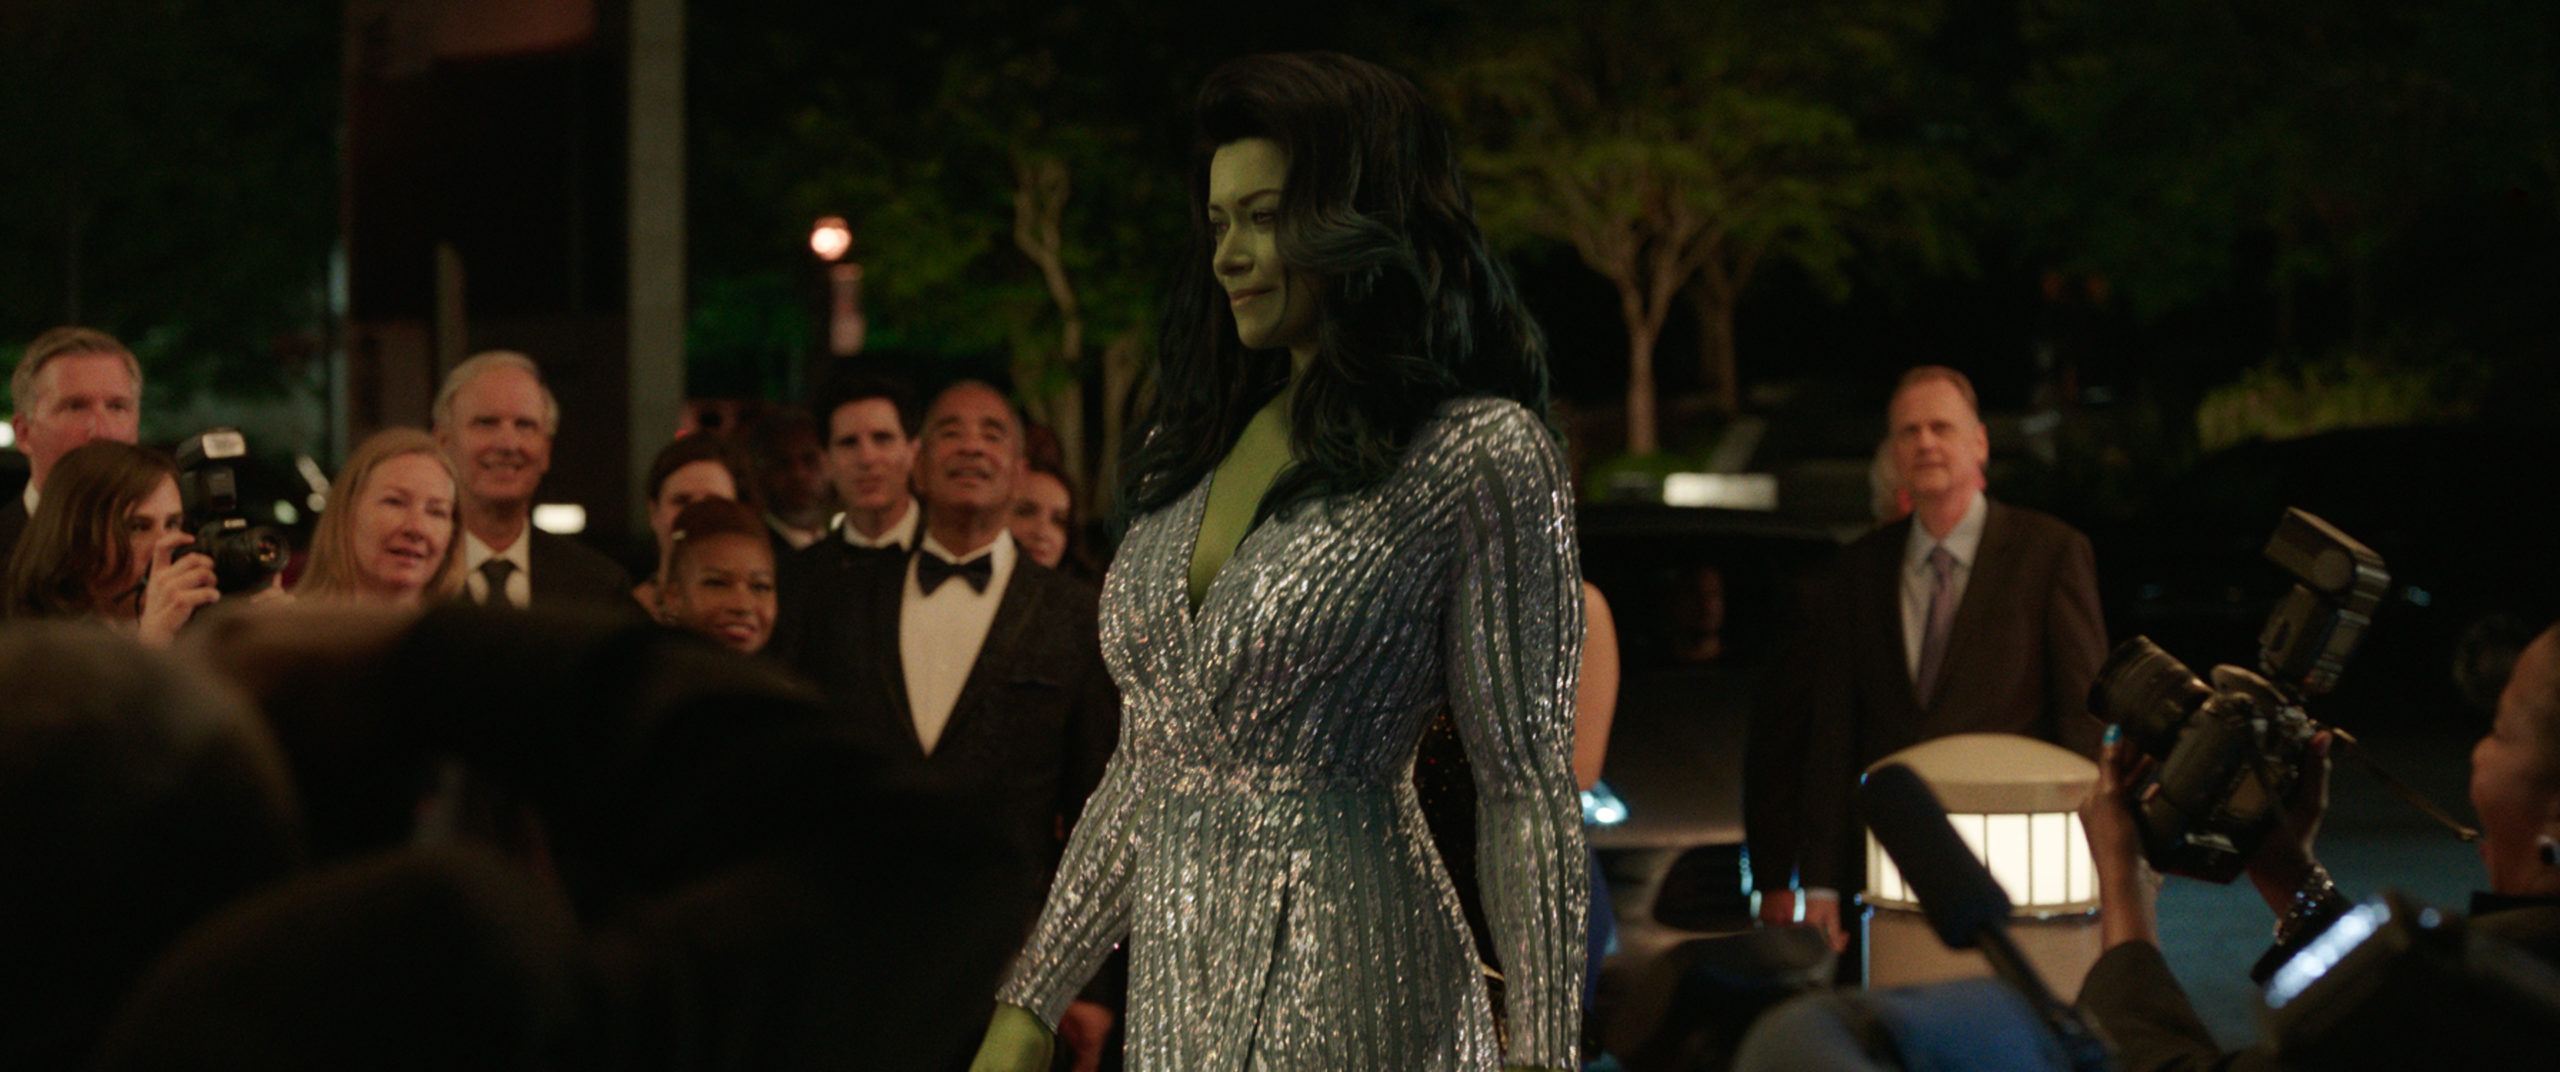 She-Hulk star Tatiana Maslany expresses doubt over a Season 2 ever getting made due to budget concerns. Oh no, anyway!